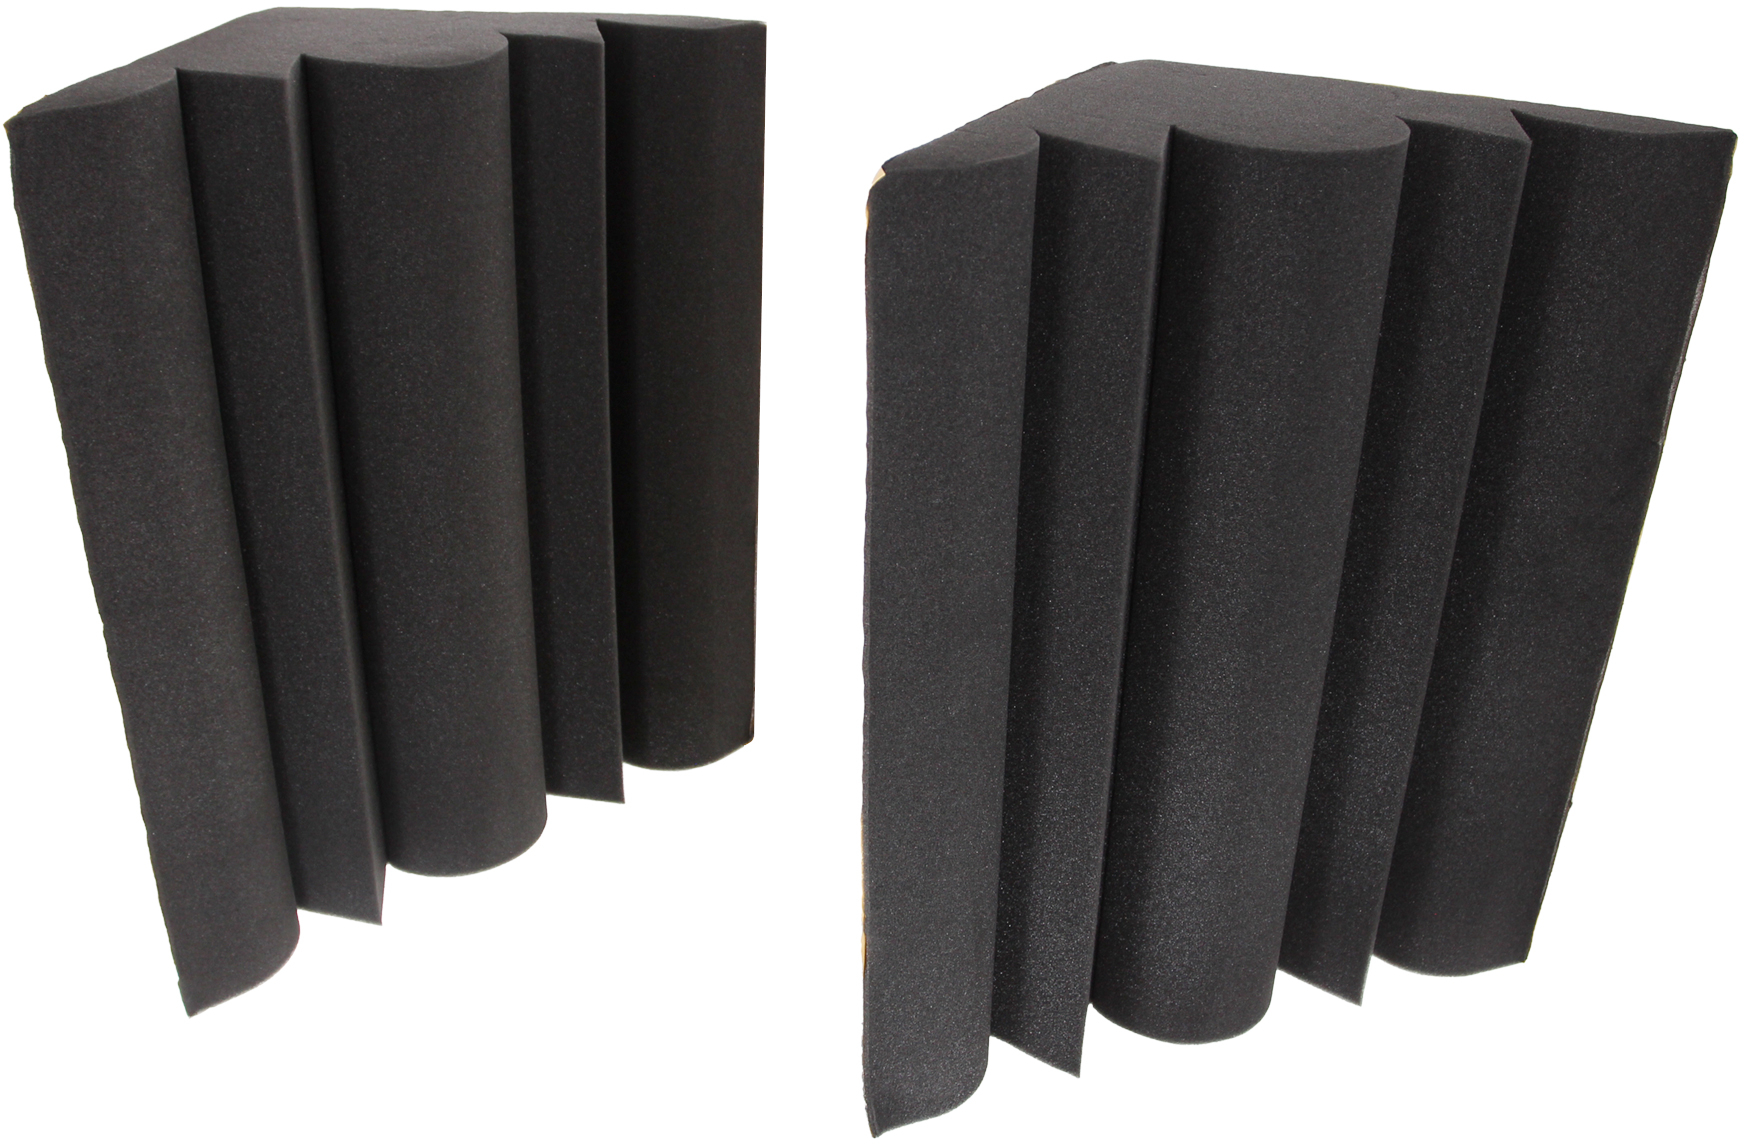 Power Studio Foam Bass 70 Adhesive Pack 2 Pieces - Panel for acoustic treatment - Variation 1